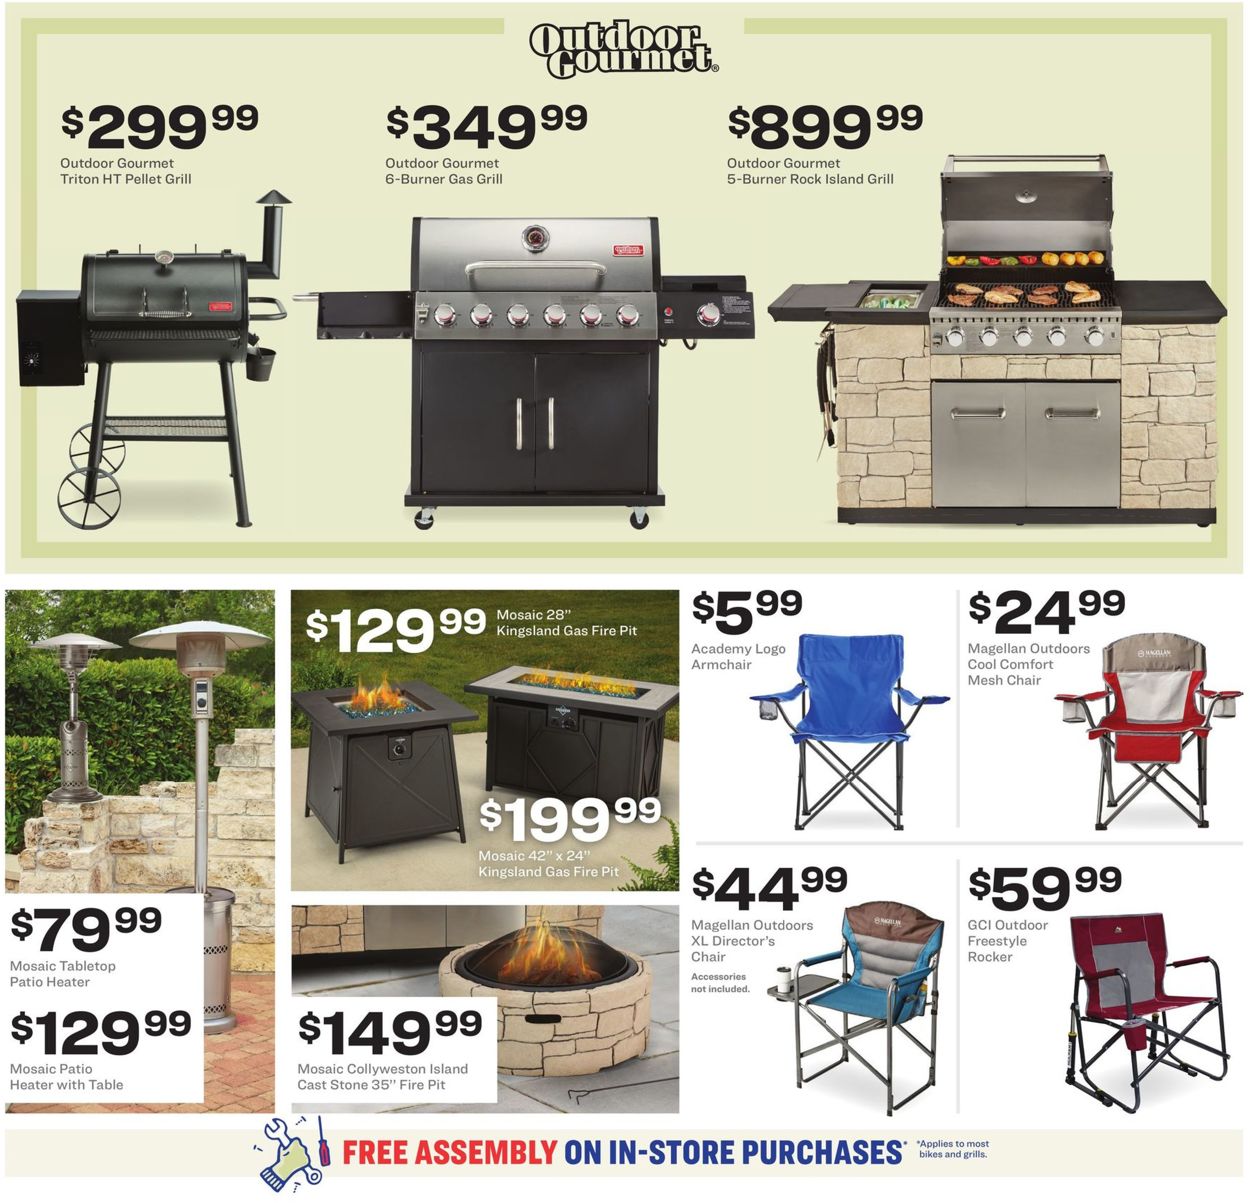 Academy Sports Cur Weekly Ad 10 26, Mosaic 28 In Kingsland Gas Fire Pit